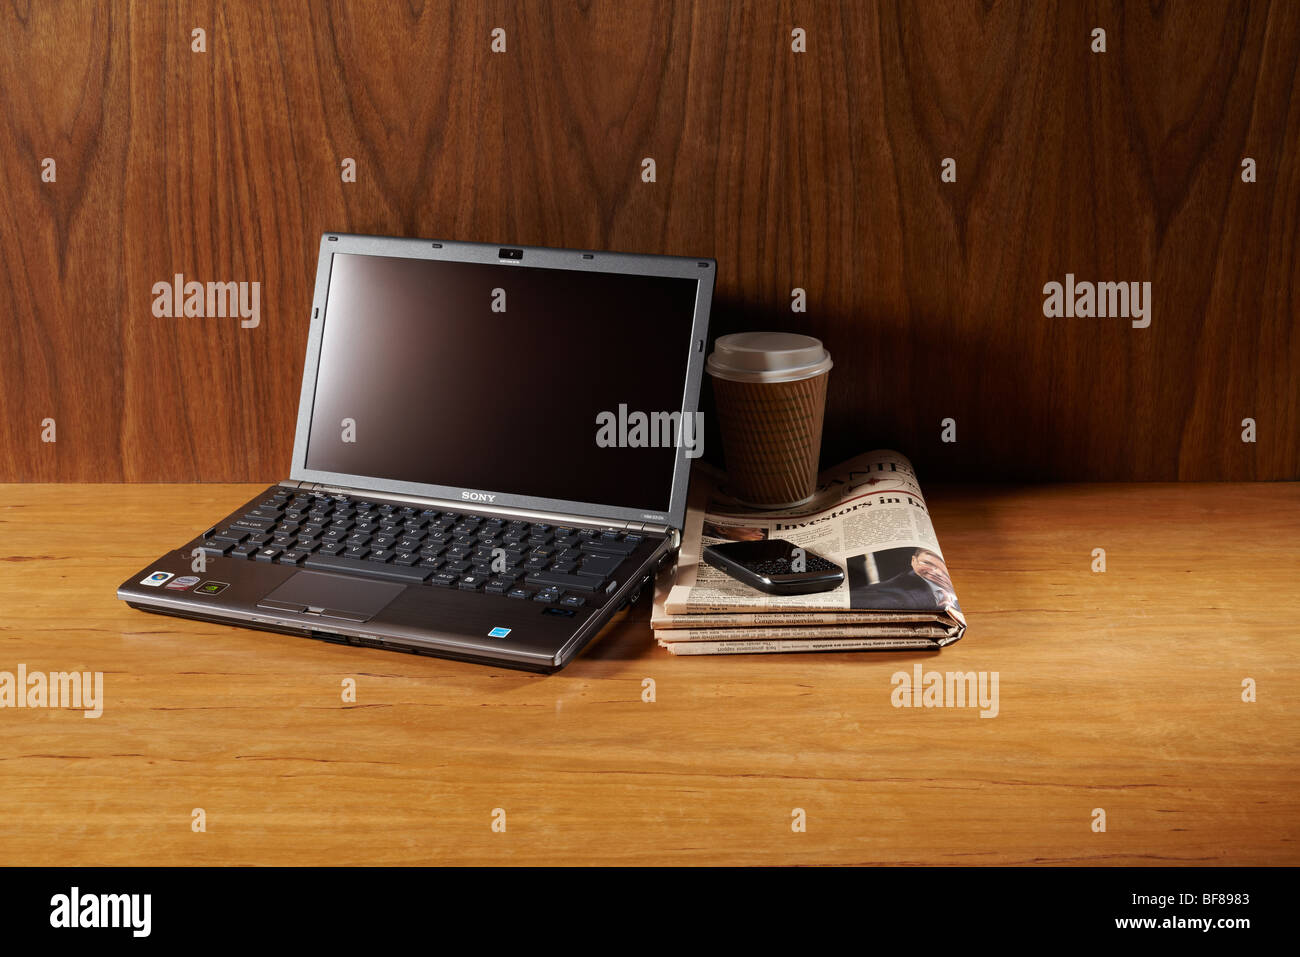 Laptop on desk with a Blackberry phone, coffee and financial newspaper. Stock Photo